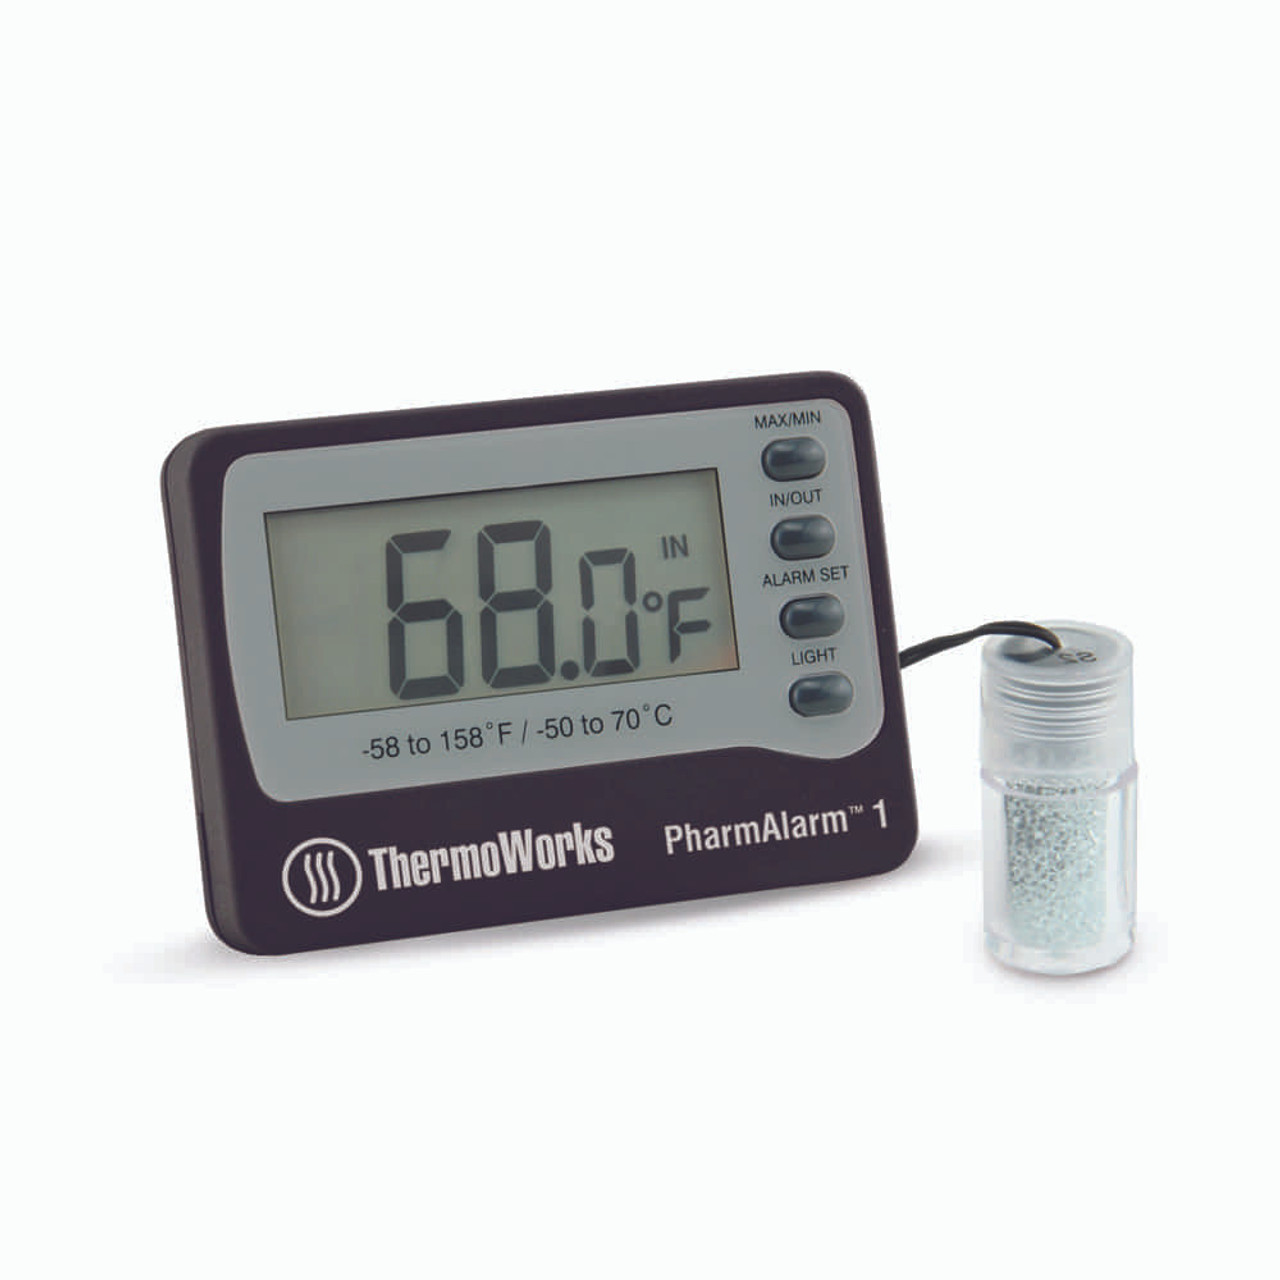 Solar Powered Digital Thermometer For Brewing